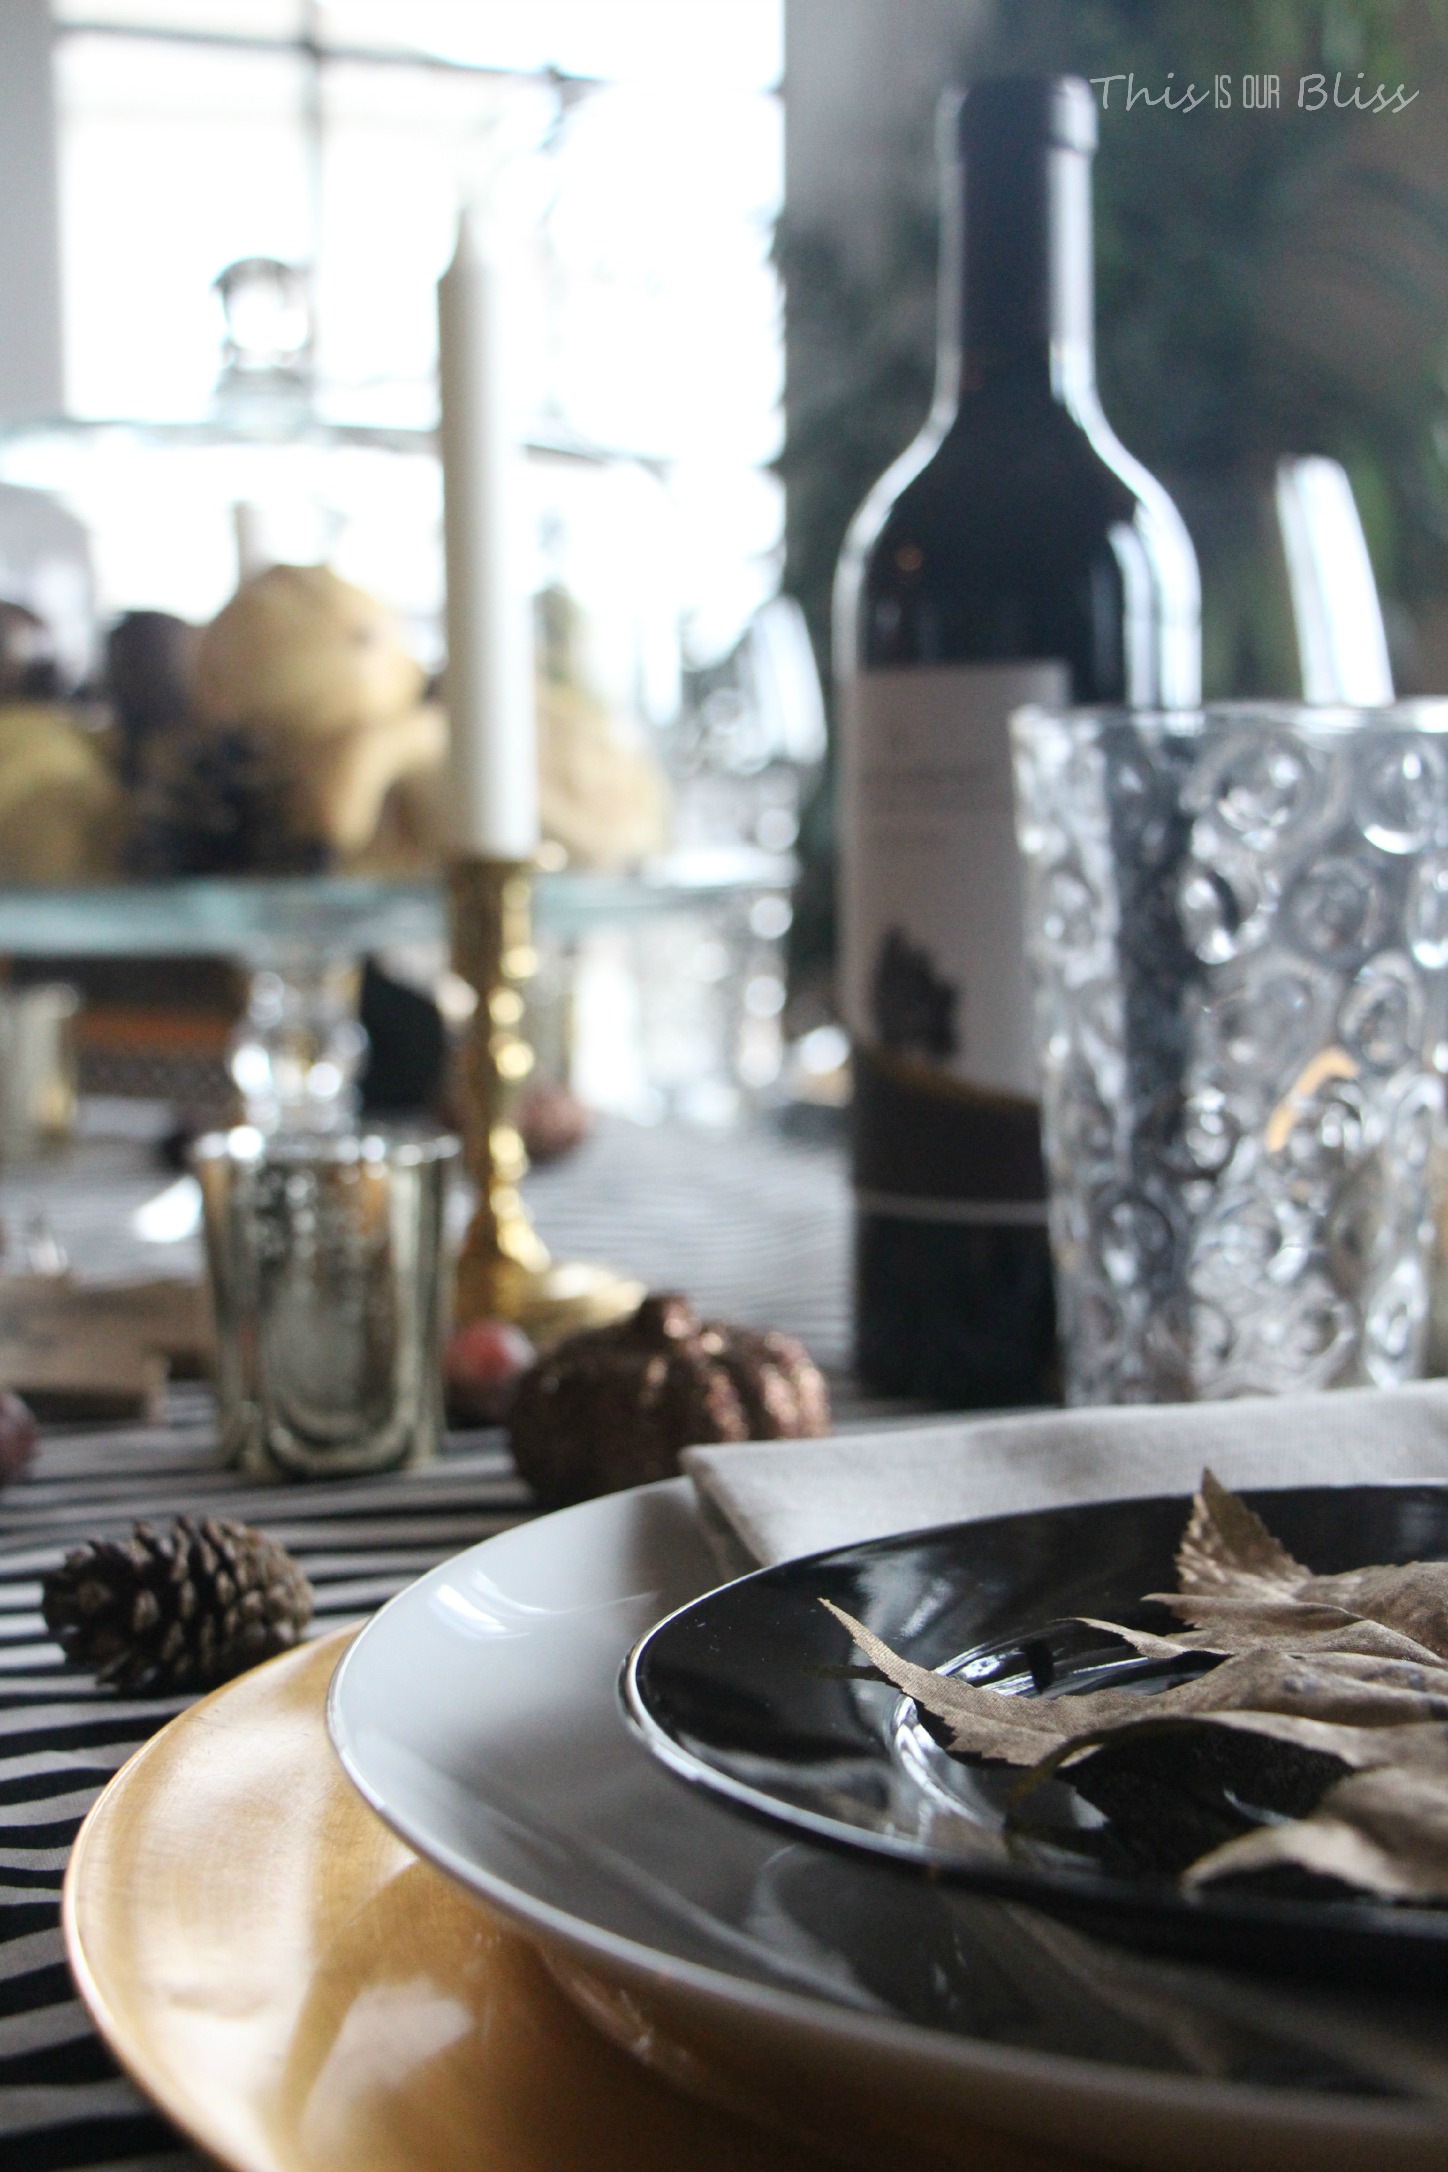 How to create a Modern & Elegant Thanksgiving Table-- black white & gold---natural touches -- This is our Bliss 9